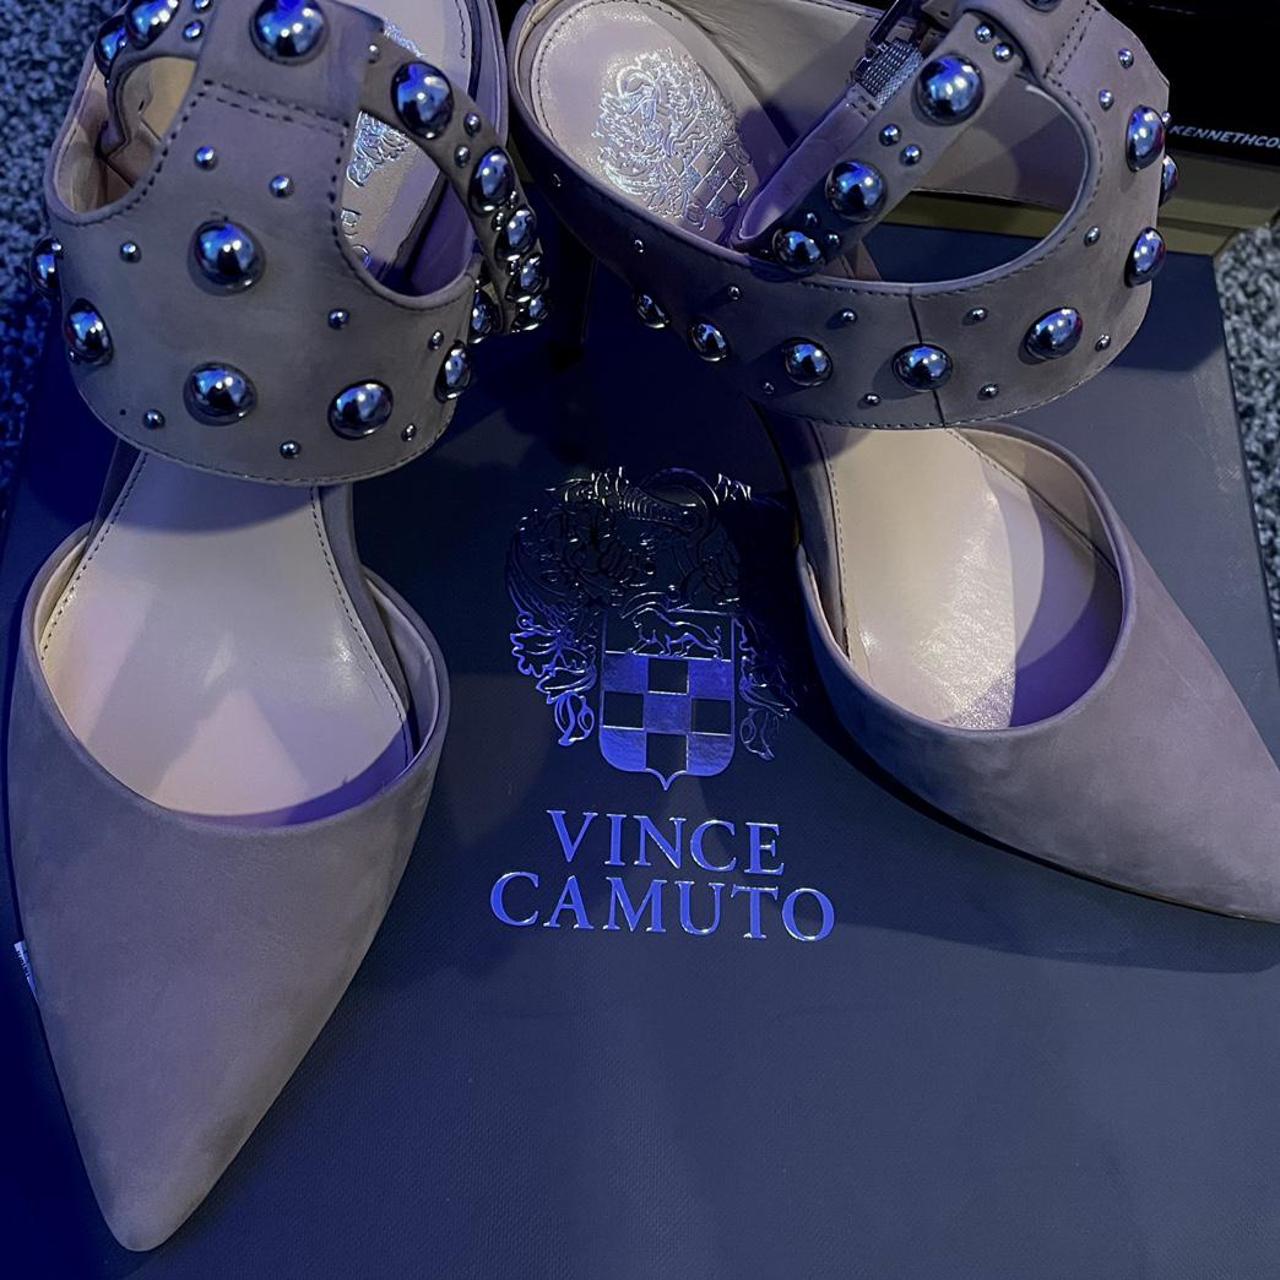 Vince Camuto Women's Courts (2)